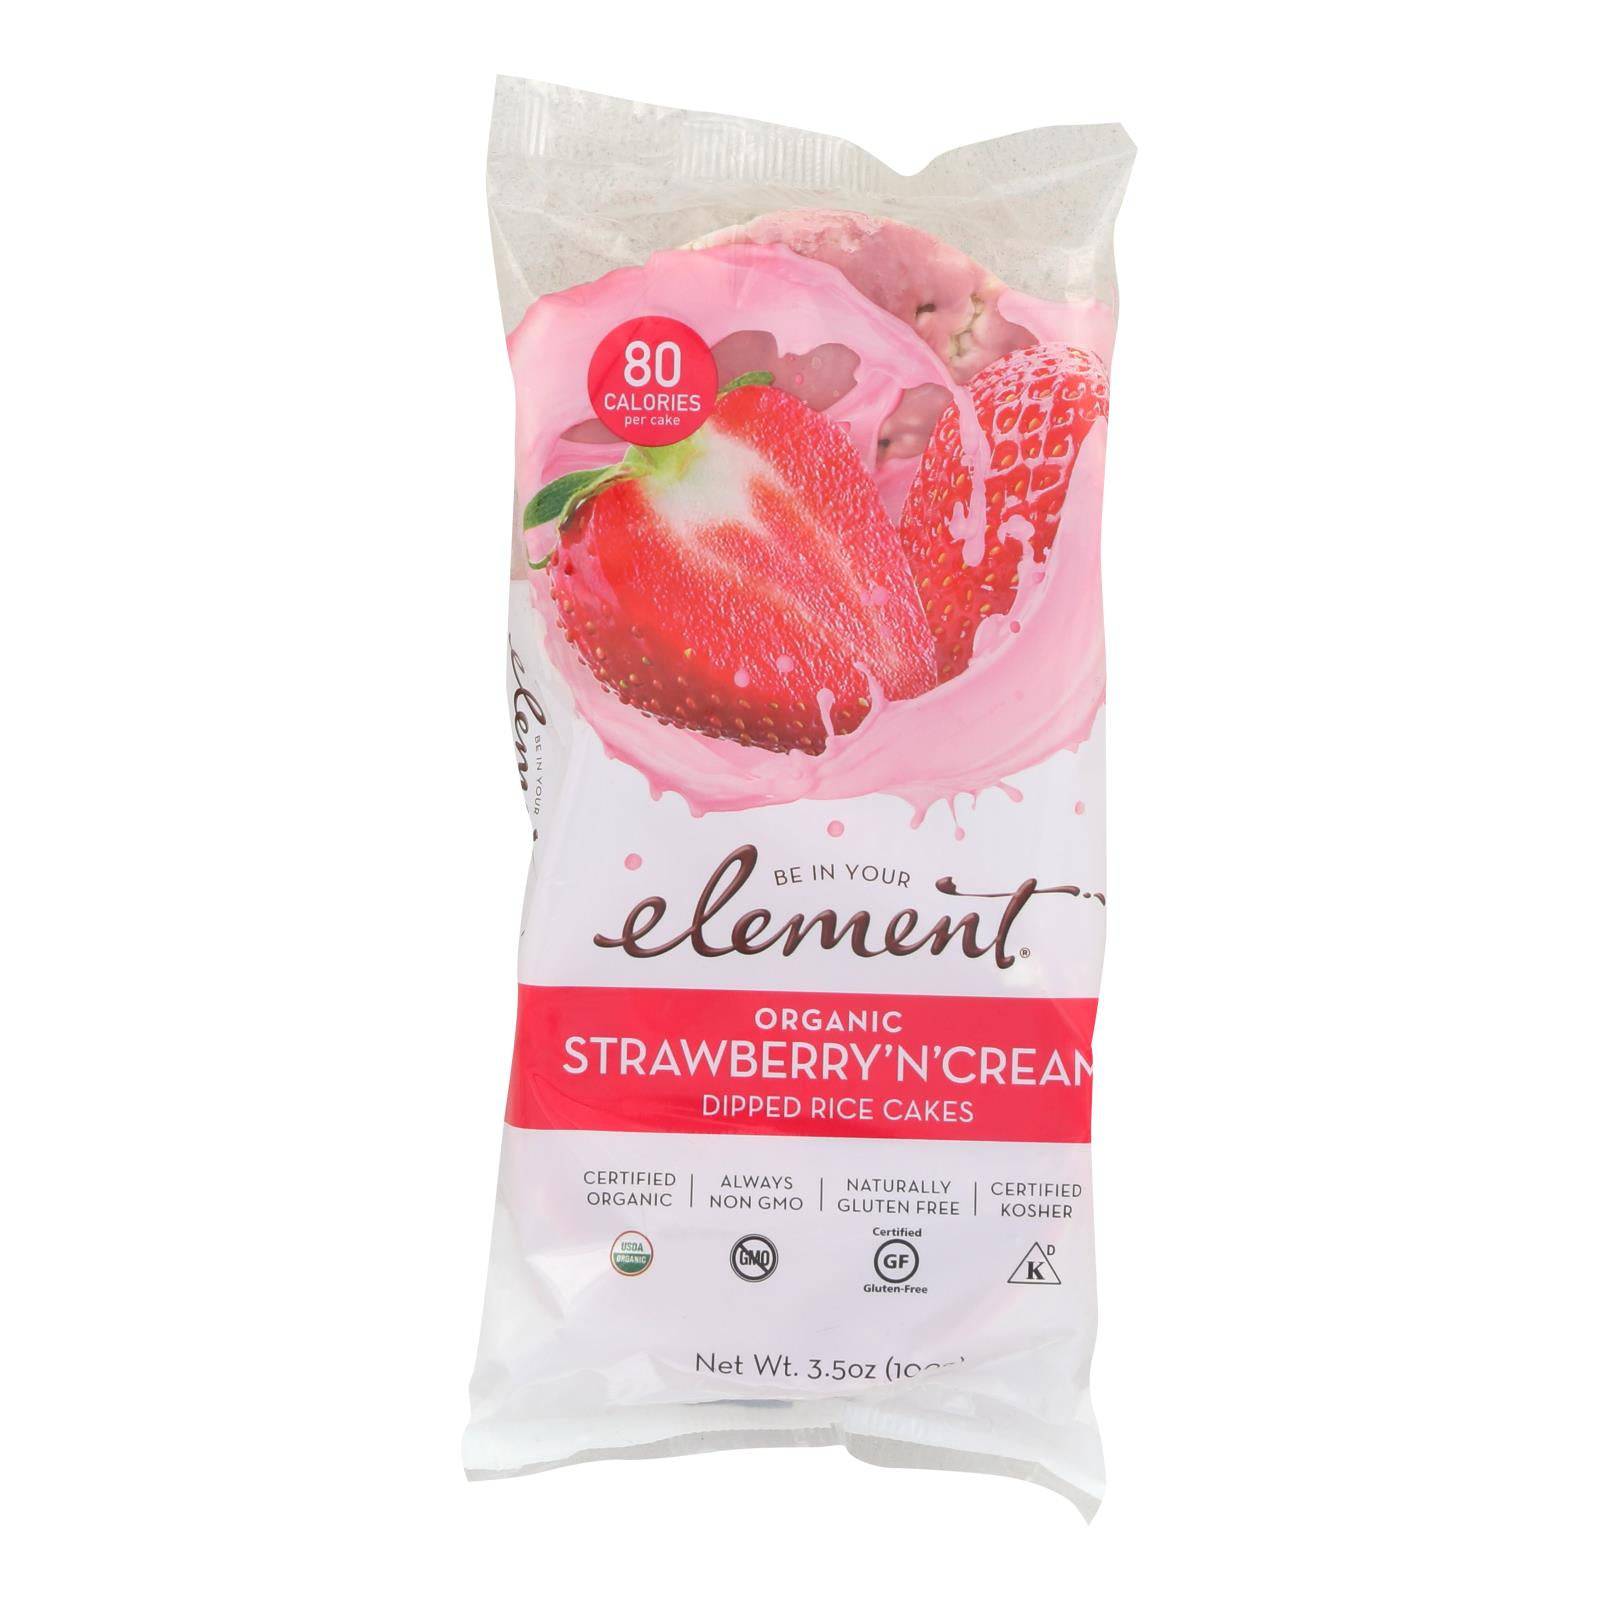 Buy Element Organic Dipped Rice Cakes - Strawberry'n'cream - Case Of 6 - 3.5 Oz  at OnlyNaturals.us